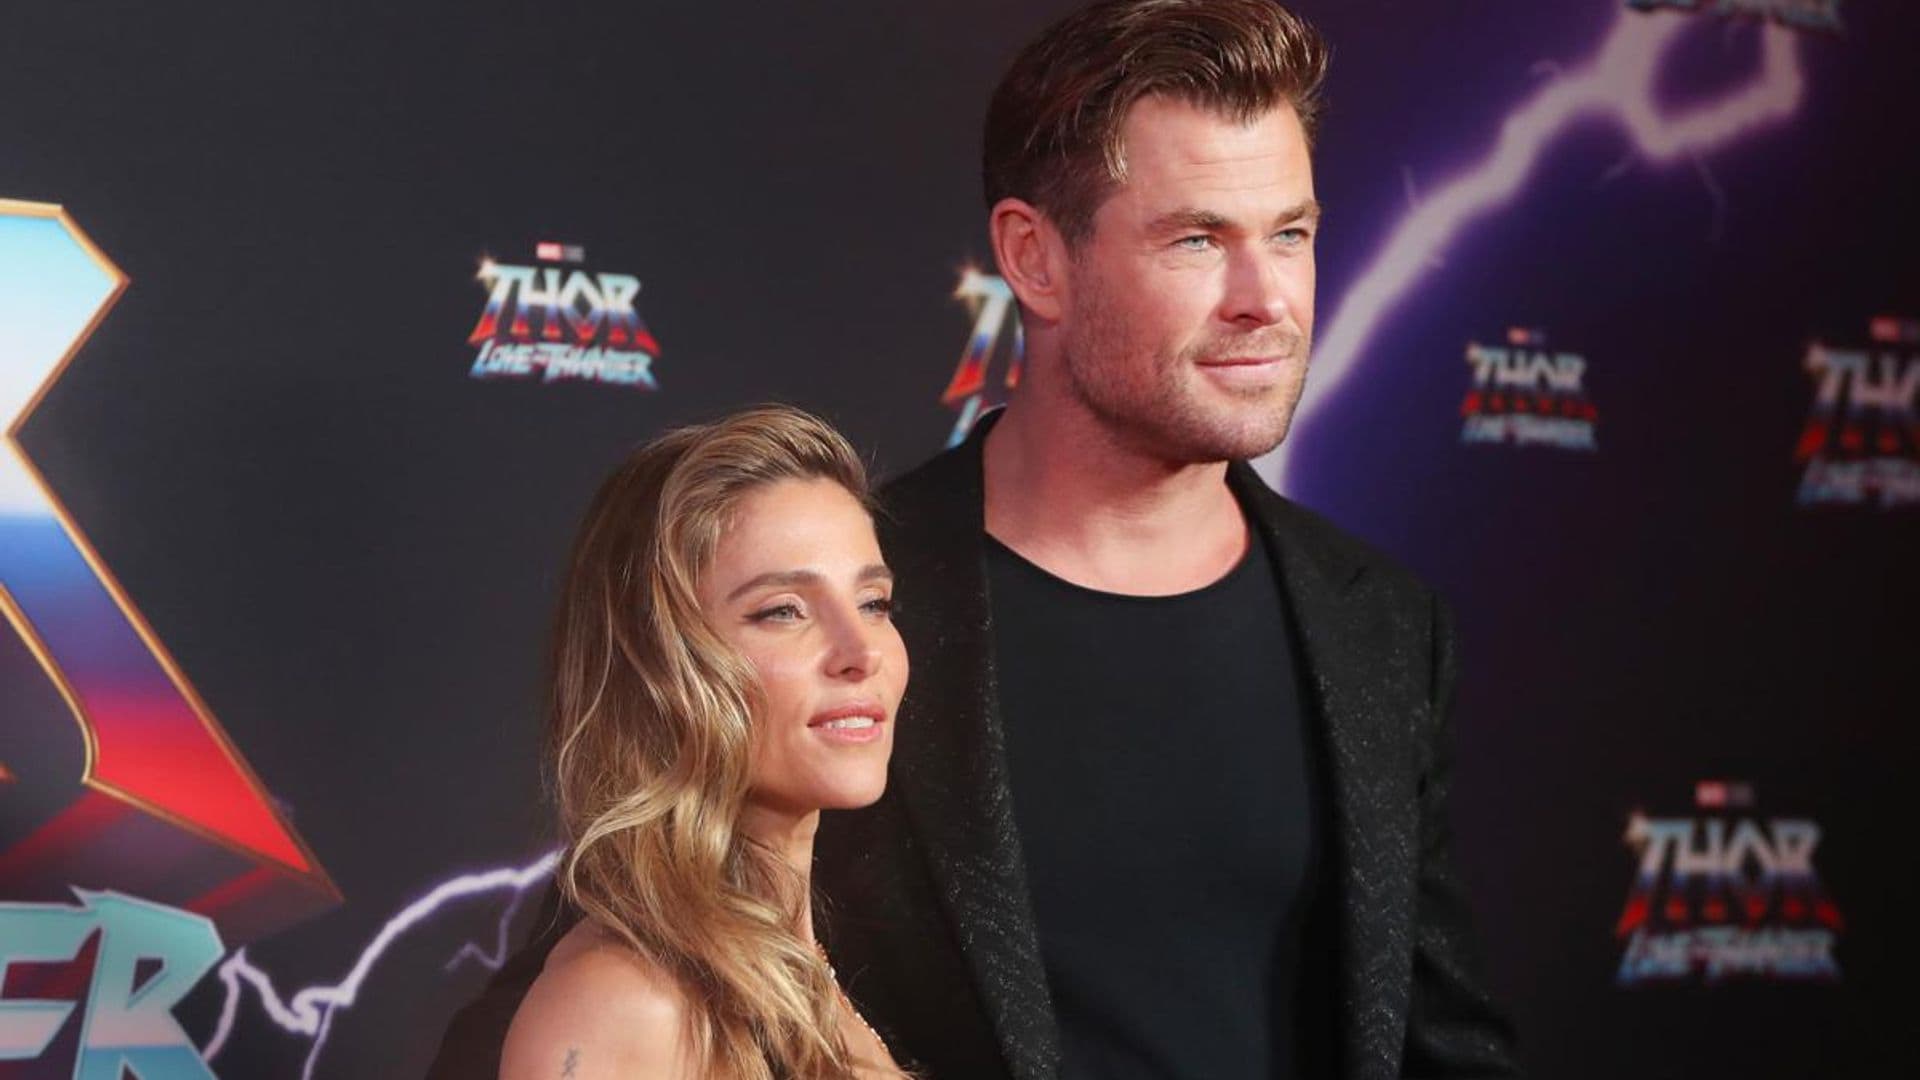 Thor: Love And Thunder Sydney Screening - Arrivals